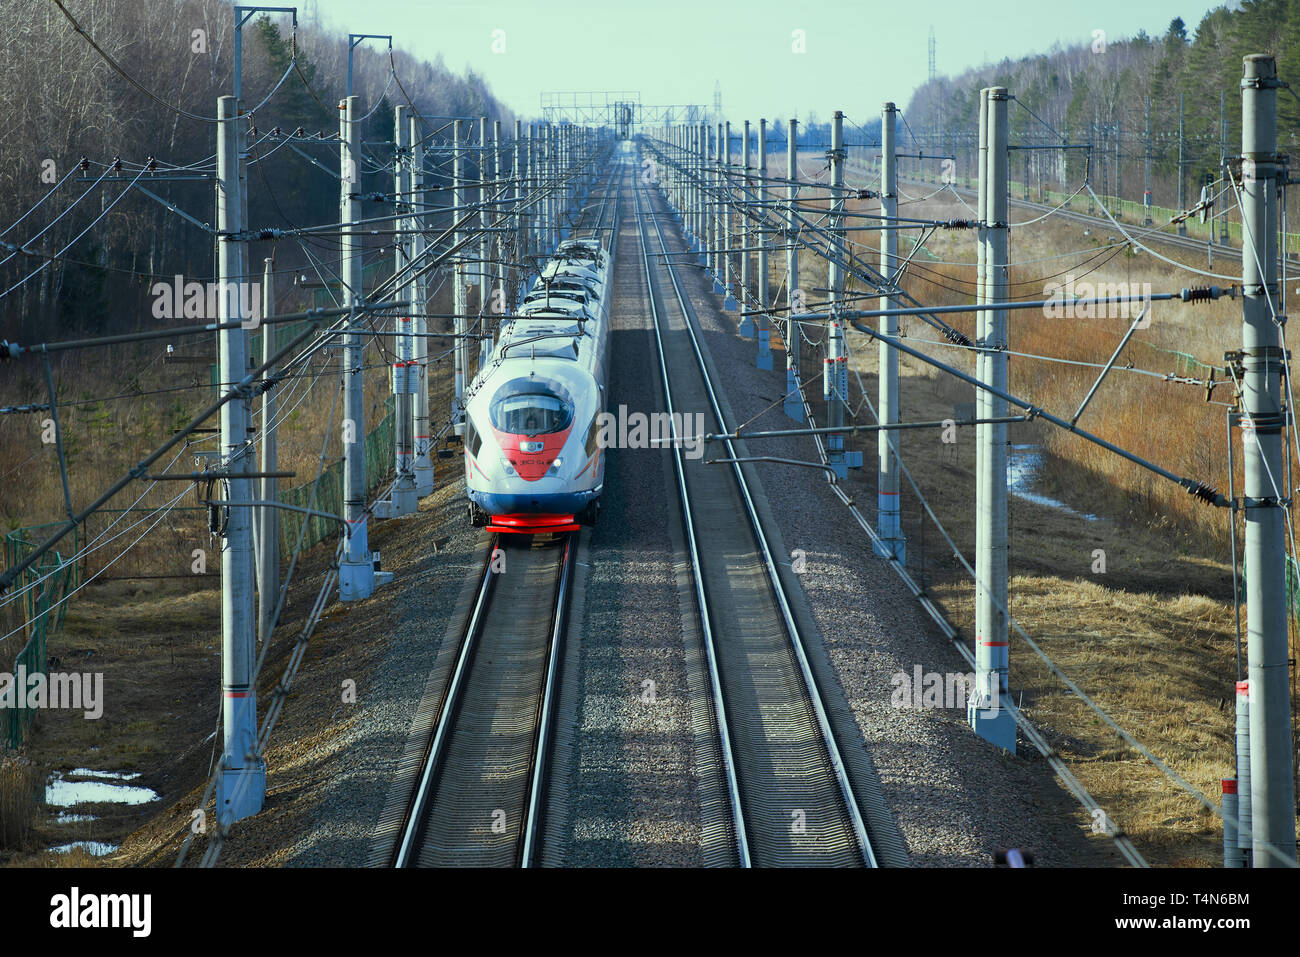 ULYANOVKA, RUSSIA - APRIL 10, 2018: Approaching modern high-speed train Sapsan EVS2-04. View from above Stock Photo